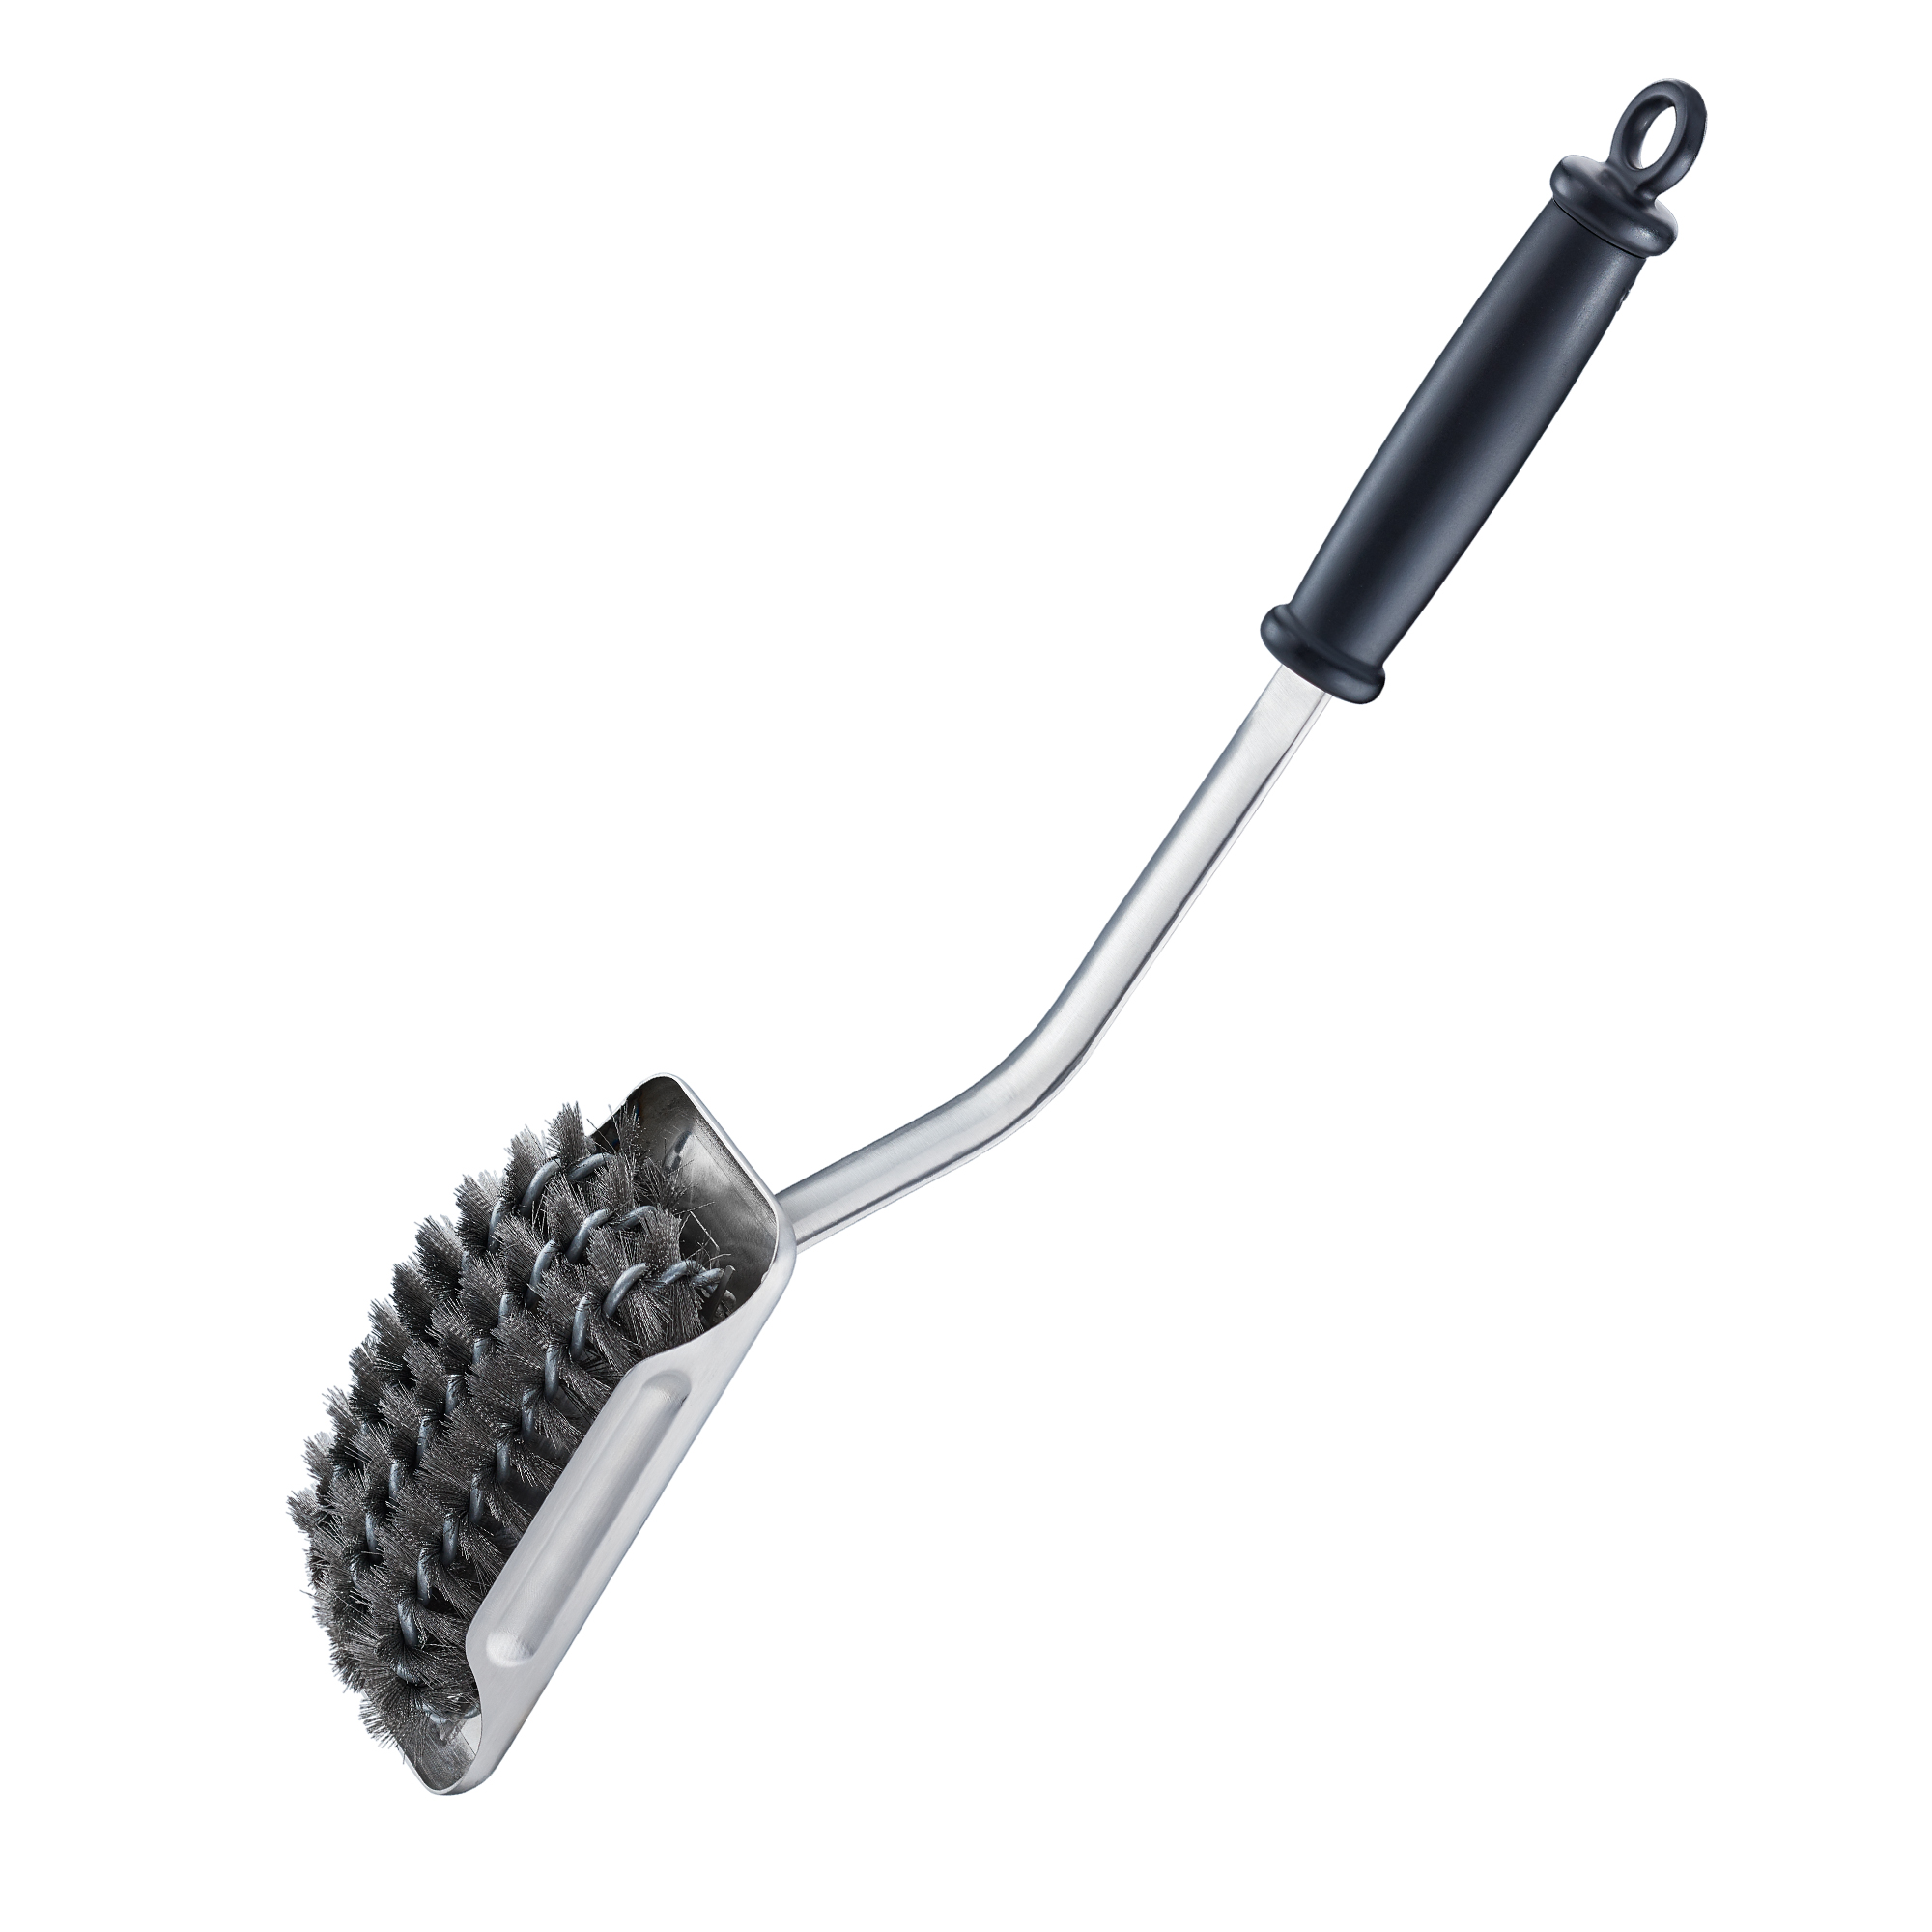 Barbecue Cleaning Brush SlideX